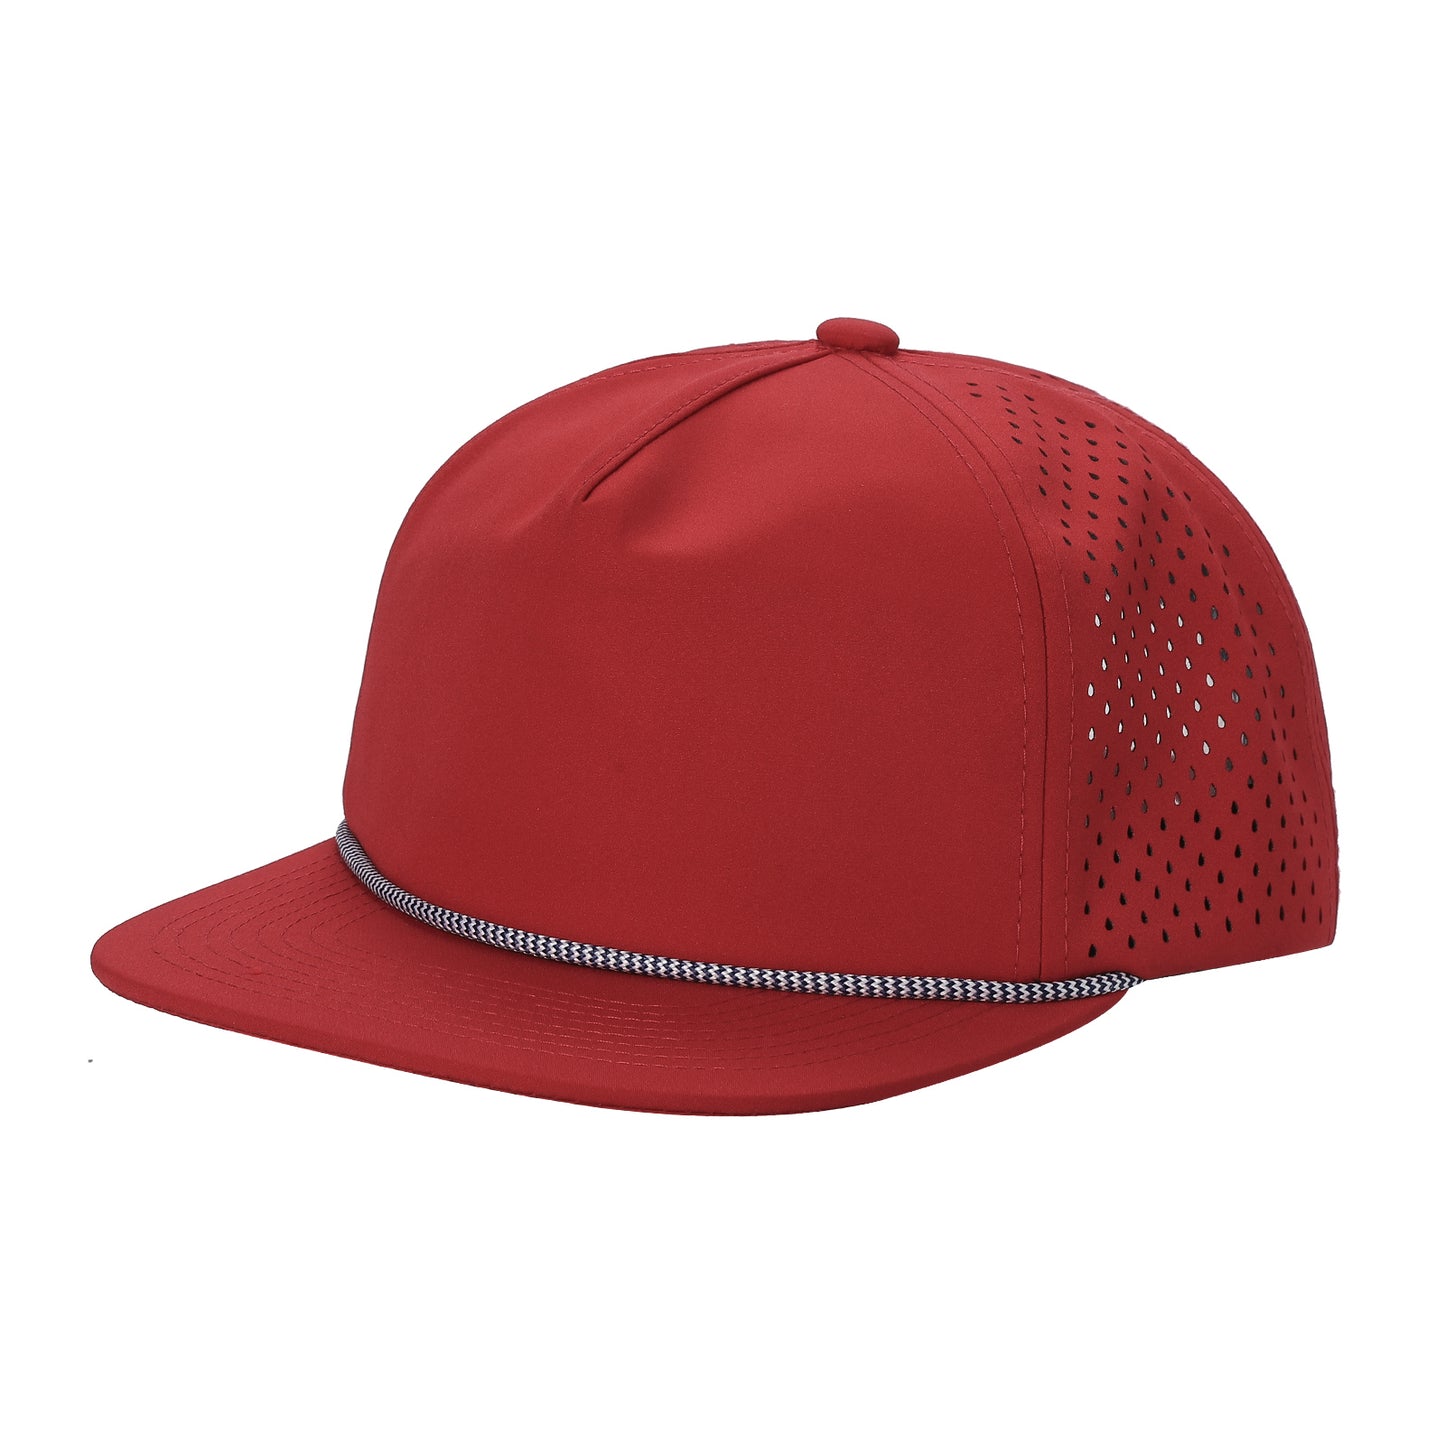 5WPR-5PANEL WATER PROOF HAT WITH ROPE